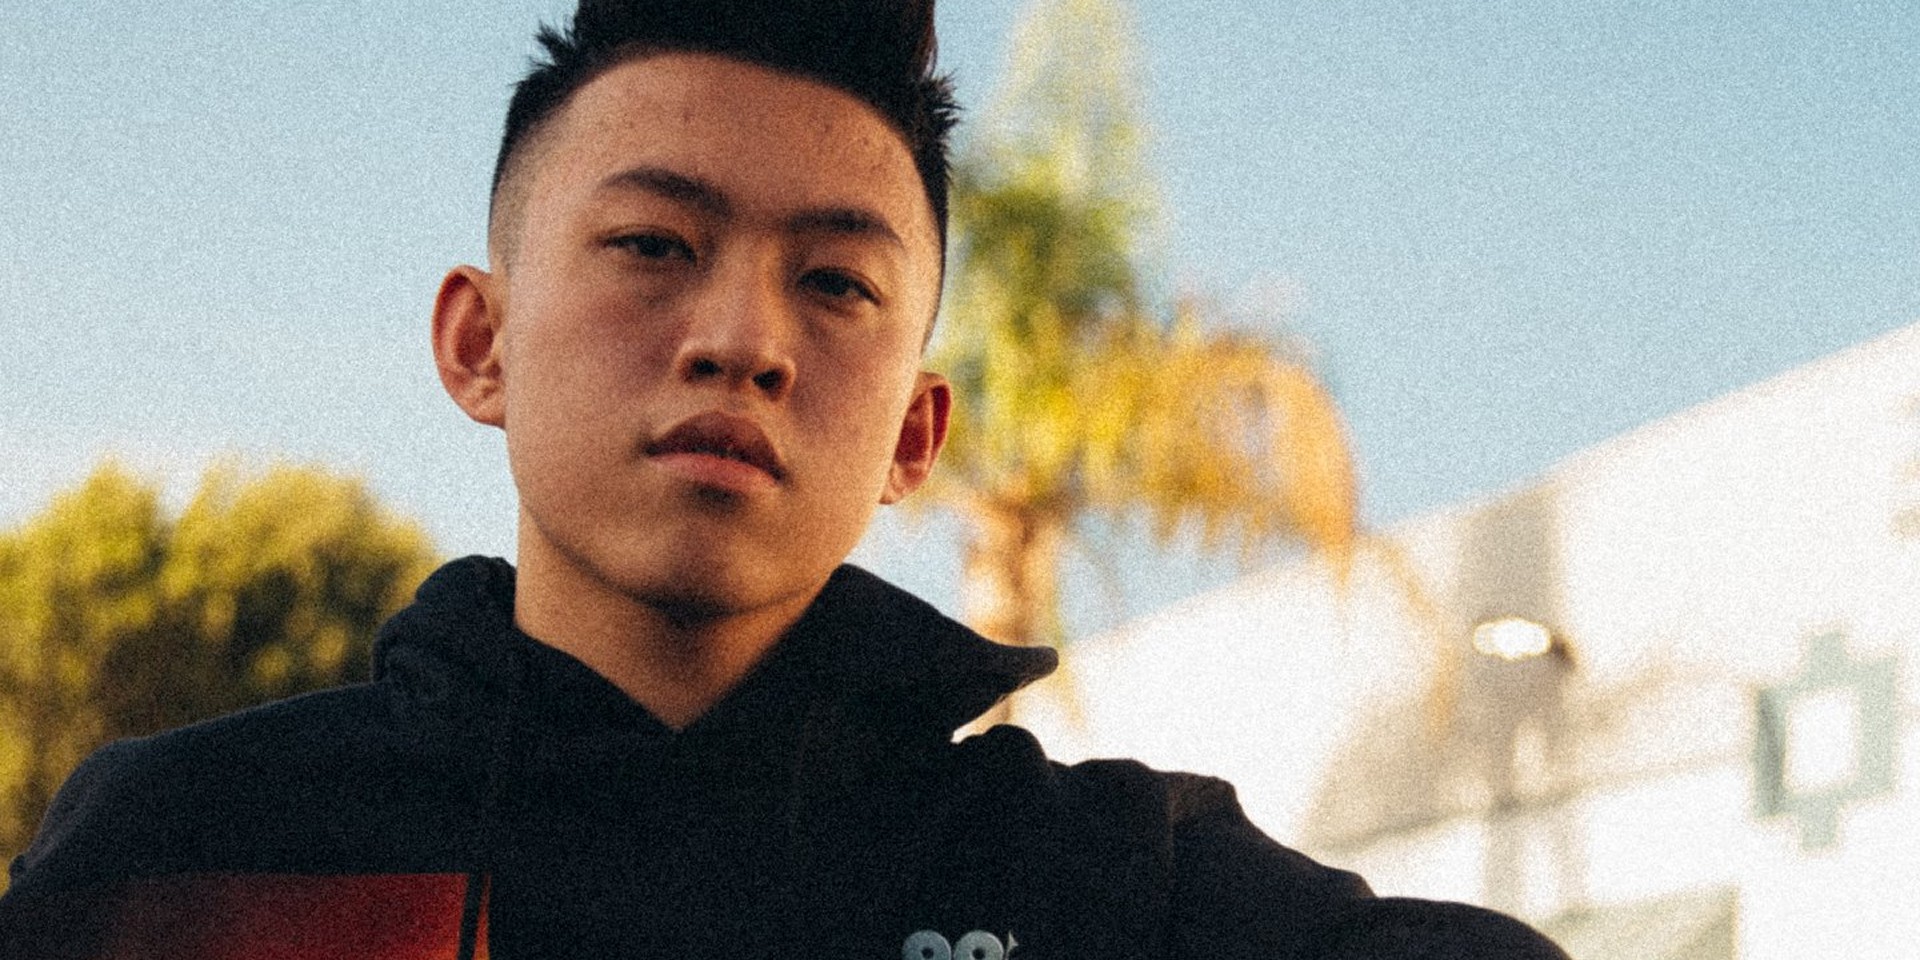 Rich Brian soundtracks the PUBG MOBILE Pro League Southeast Final with new music video 'Sydney' – watch